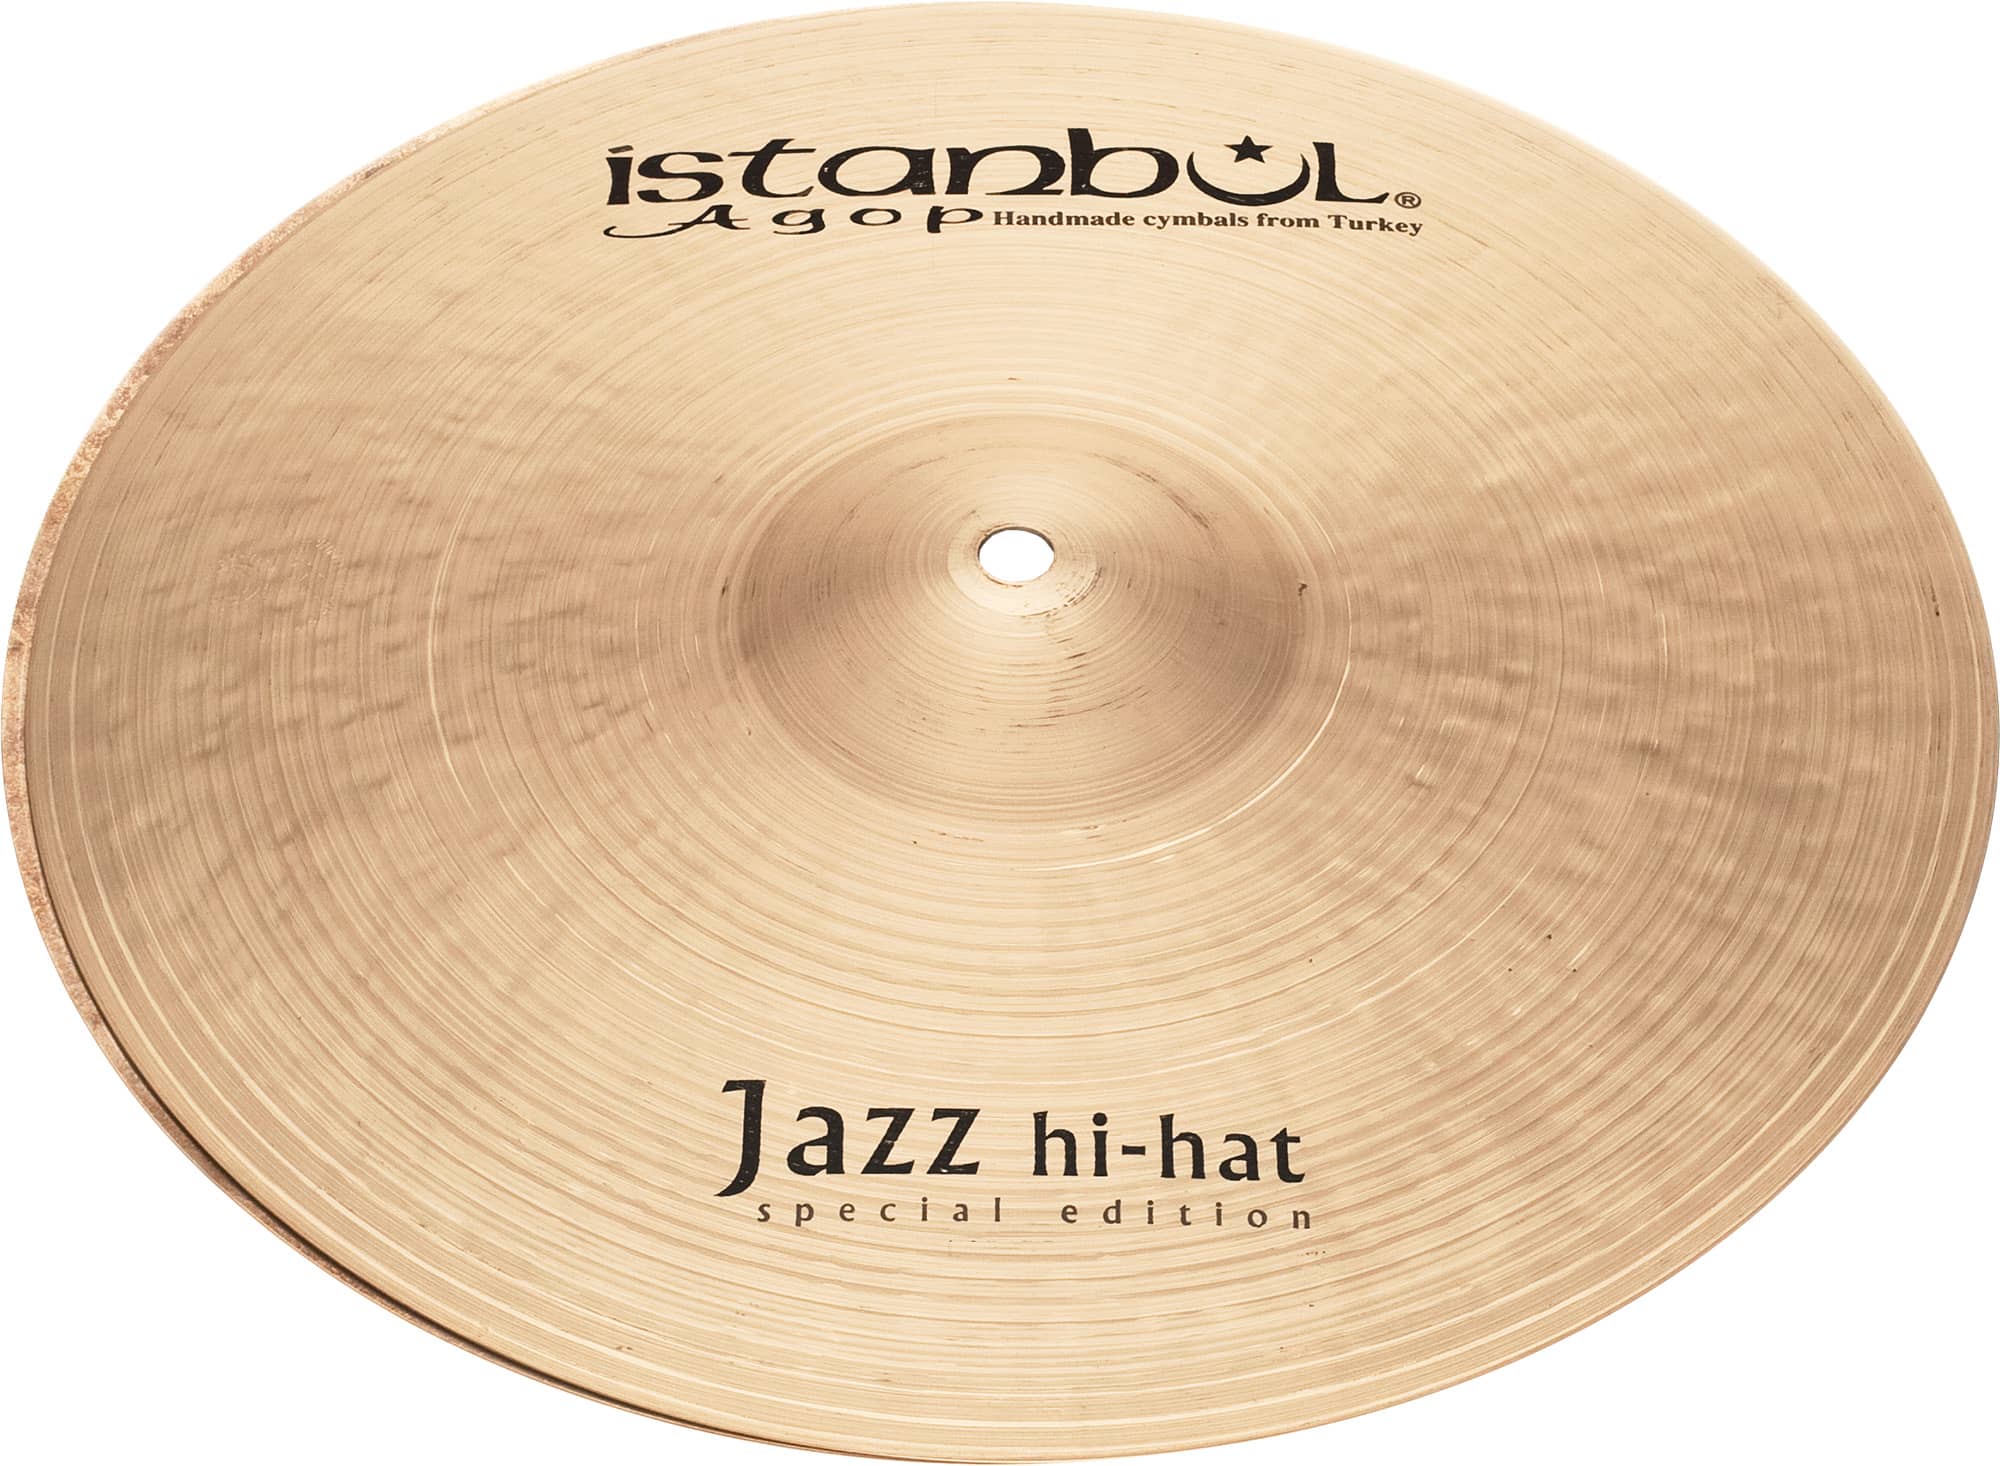 Special Edition Series Special Edition Jazz Hi-Hats (ペア) ジャズハイハットシンバル 13